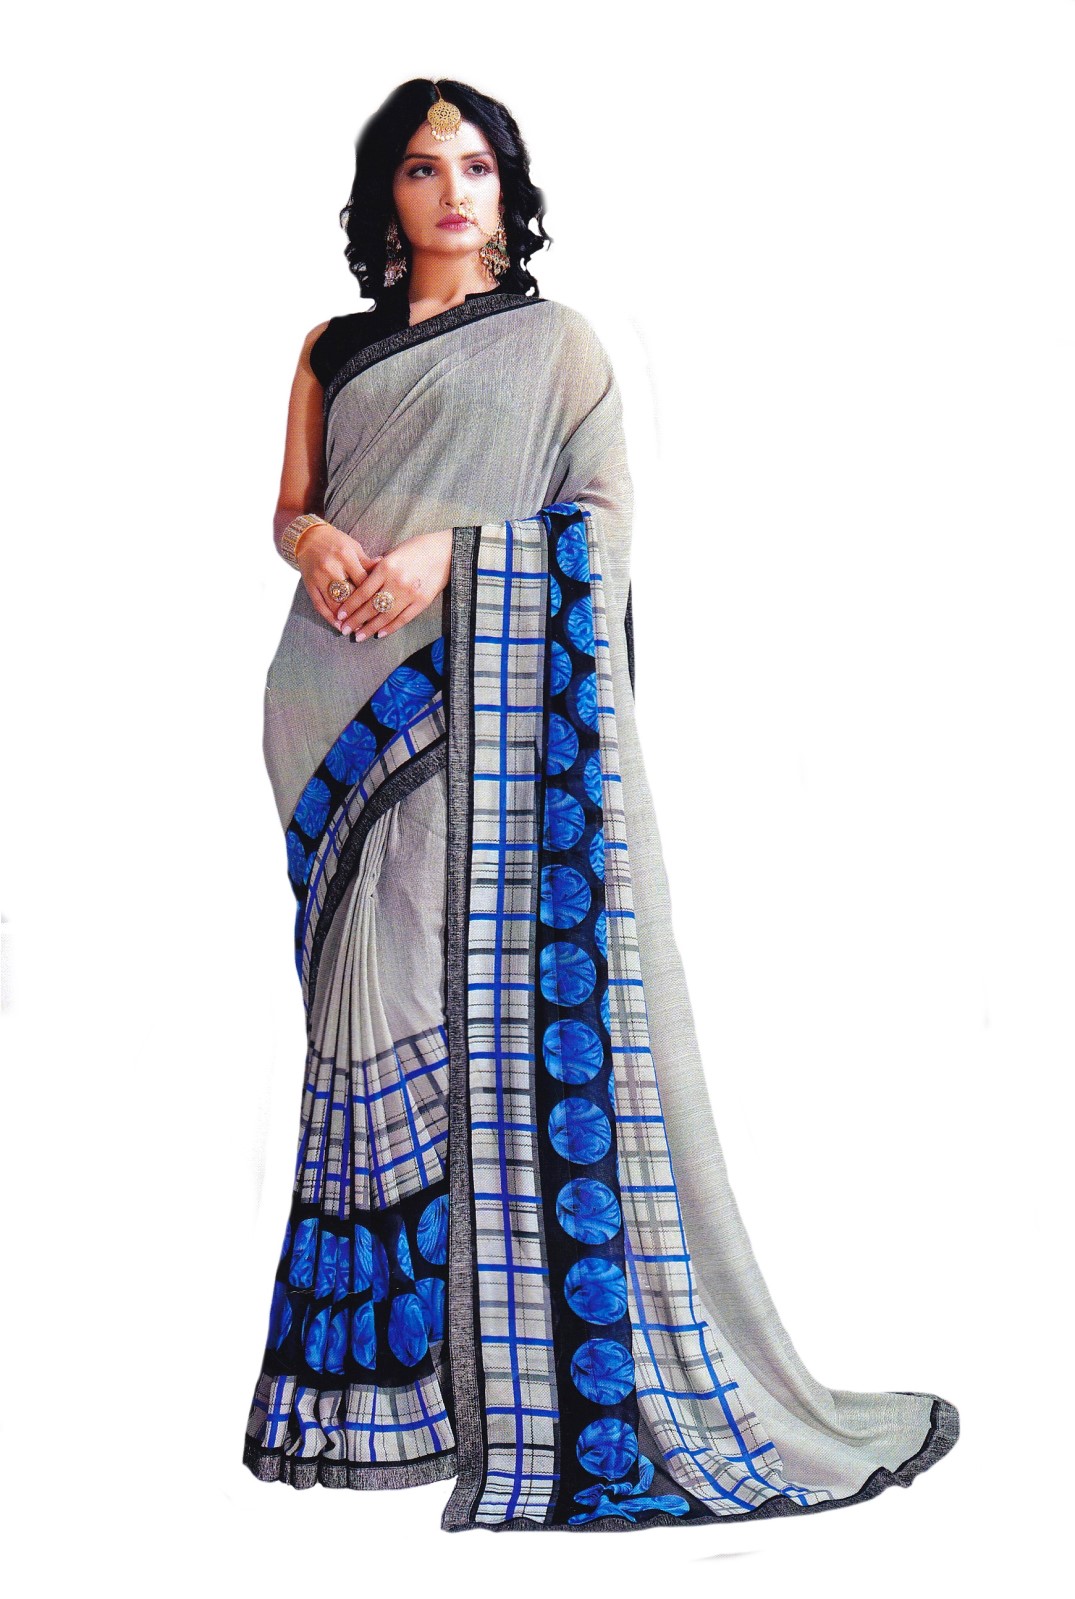 SAREE S-GEORGETTE-SHADED EMBD-SPP 7